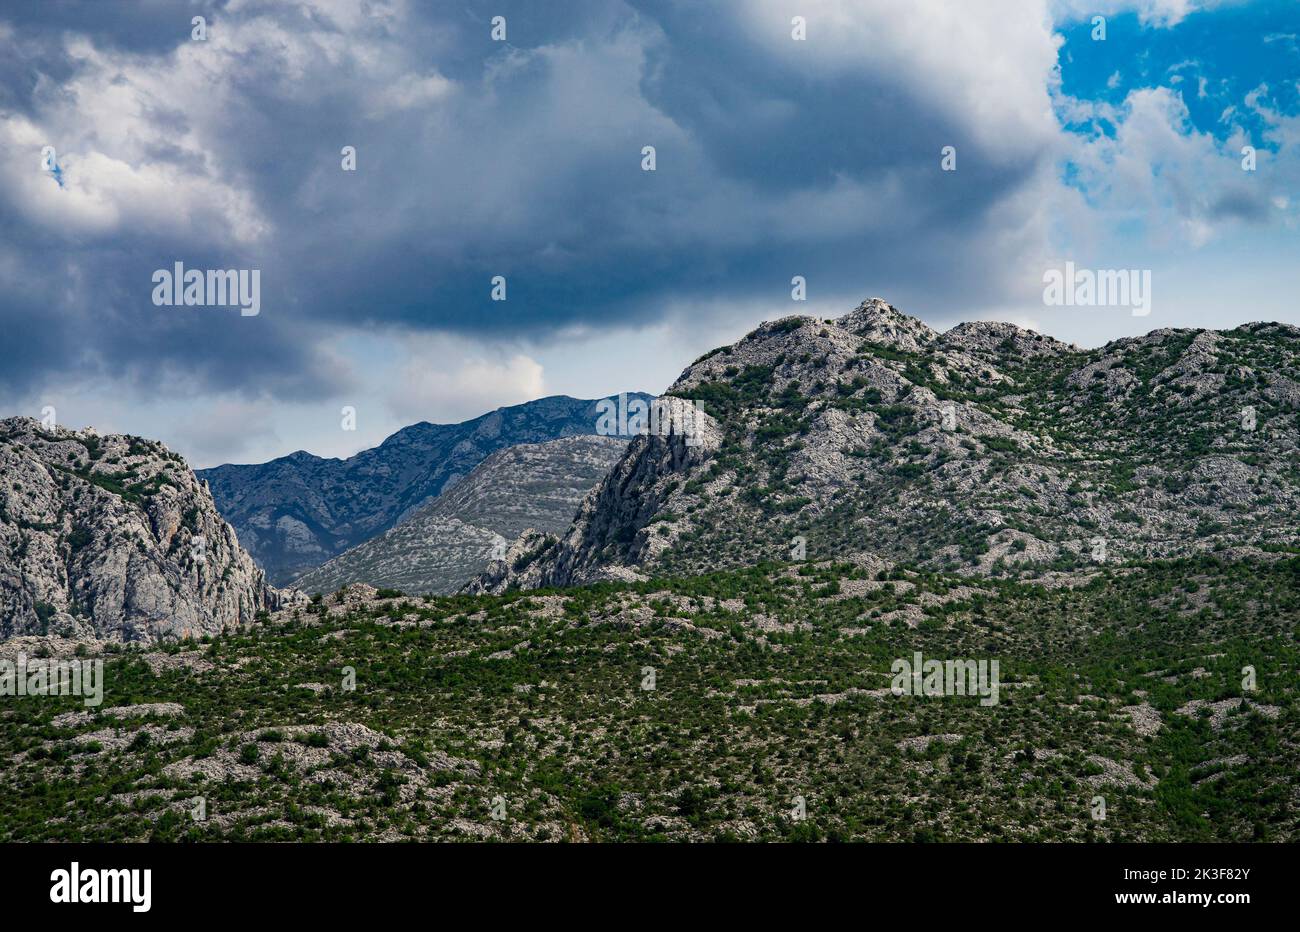 Landscape view of mediterranean mountains, located in Croatia, Paklenica. Stock Photo